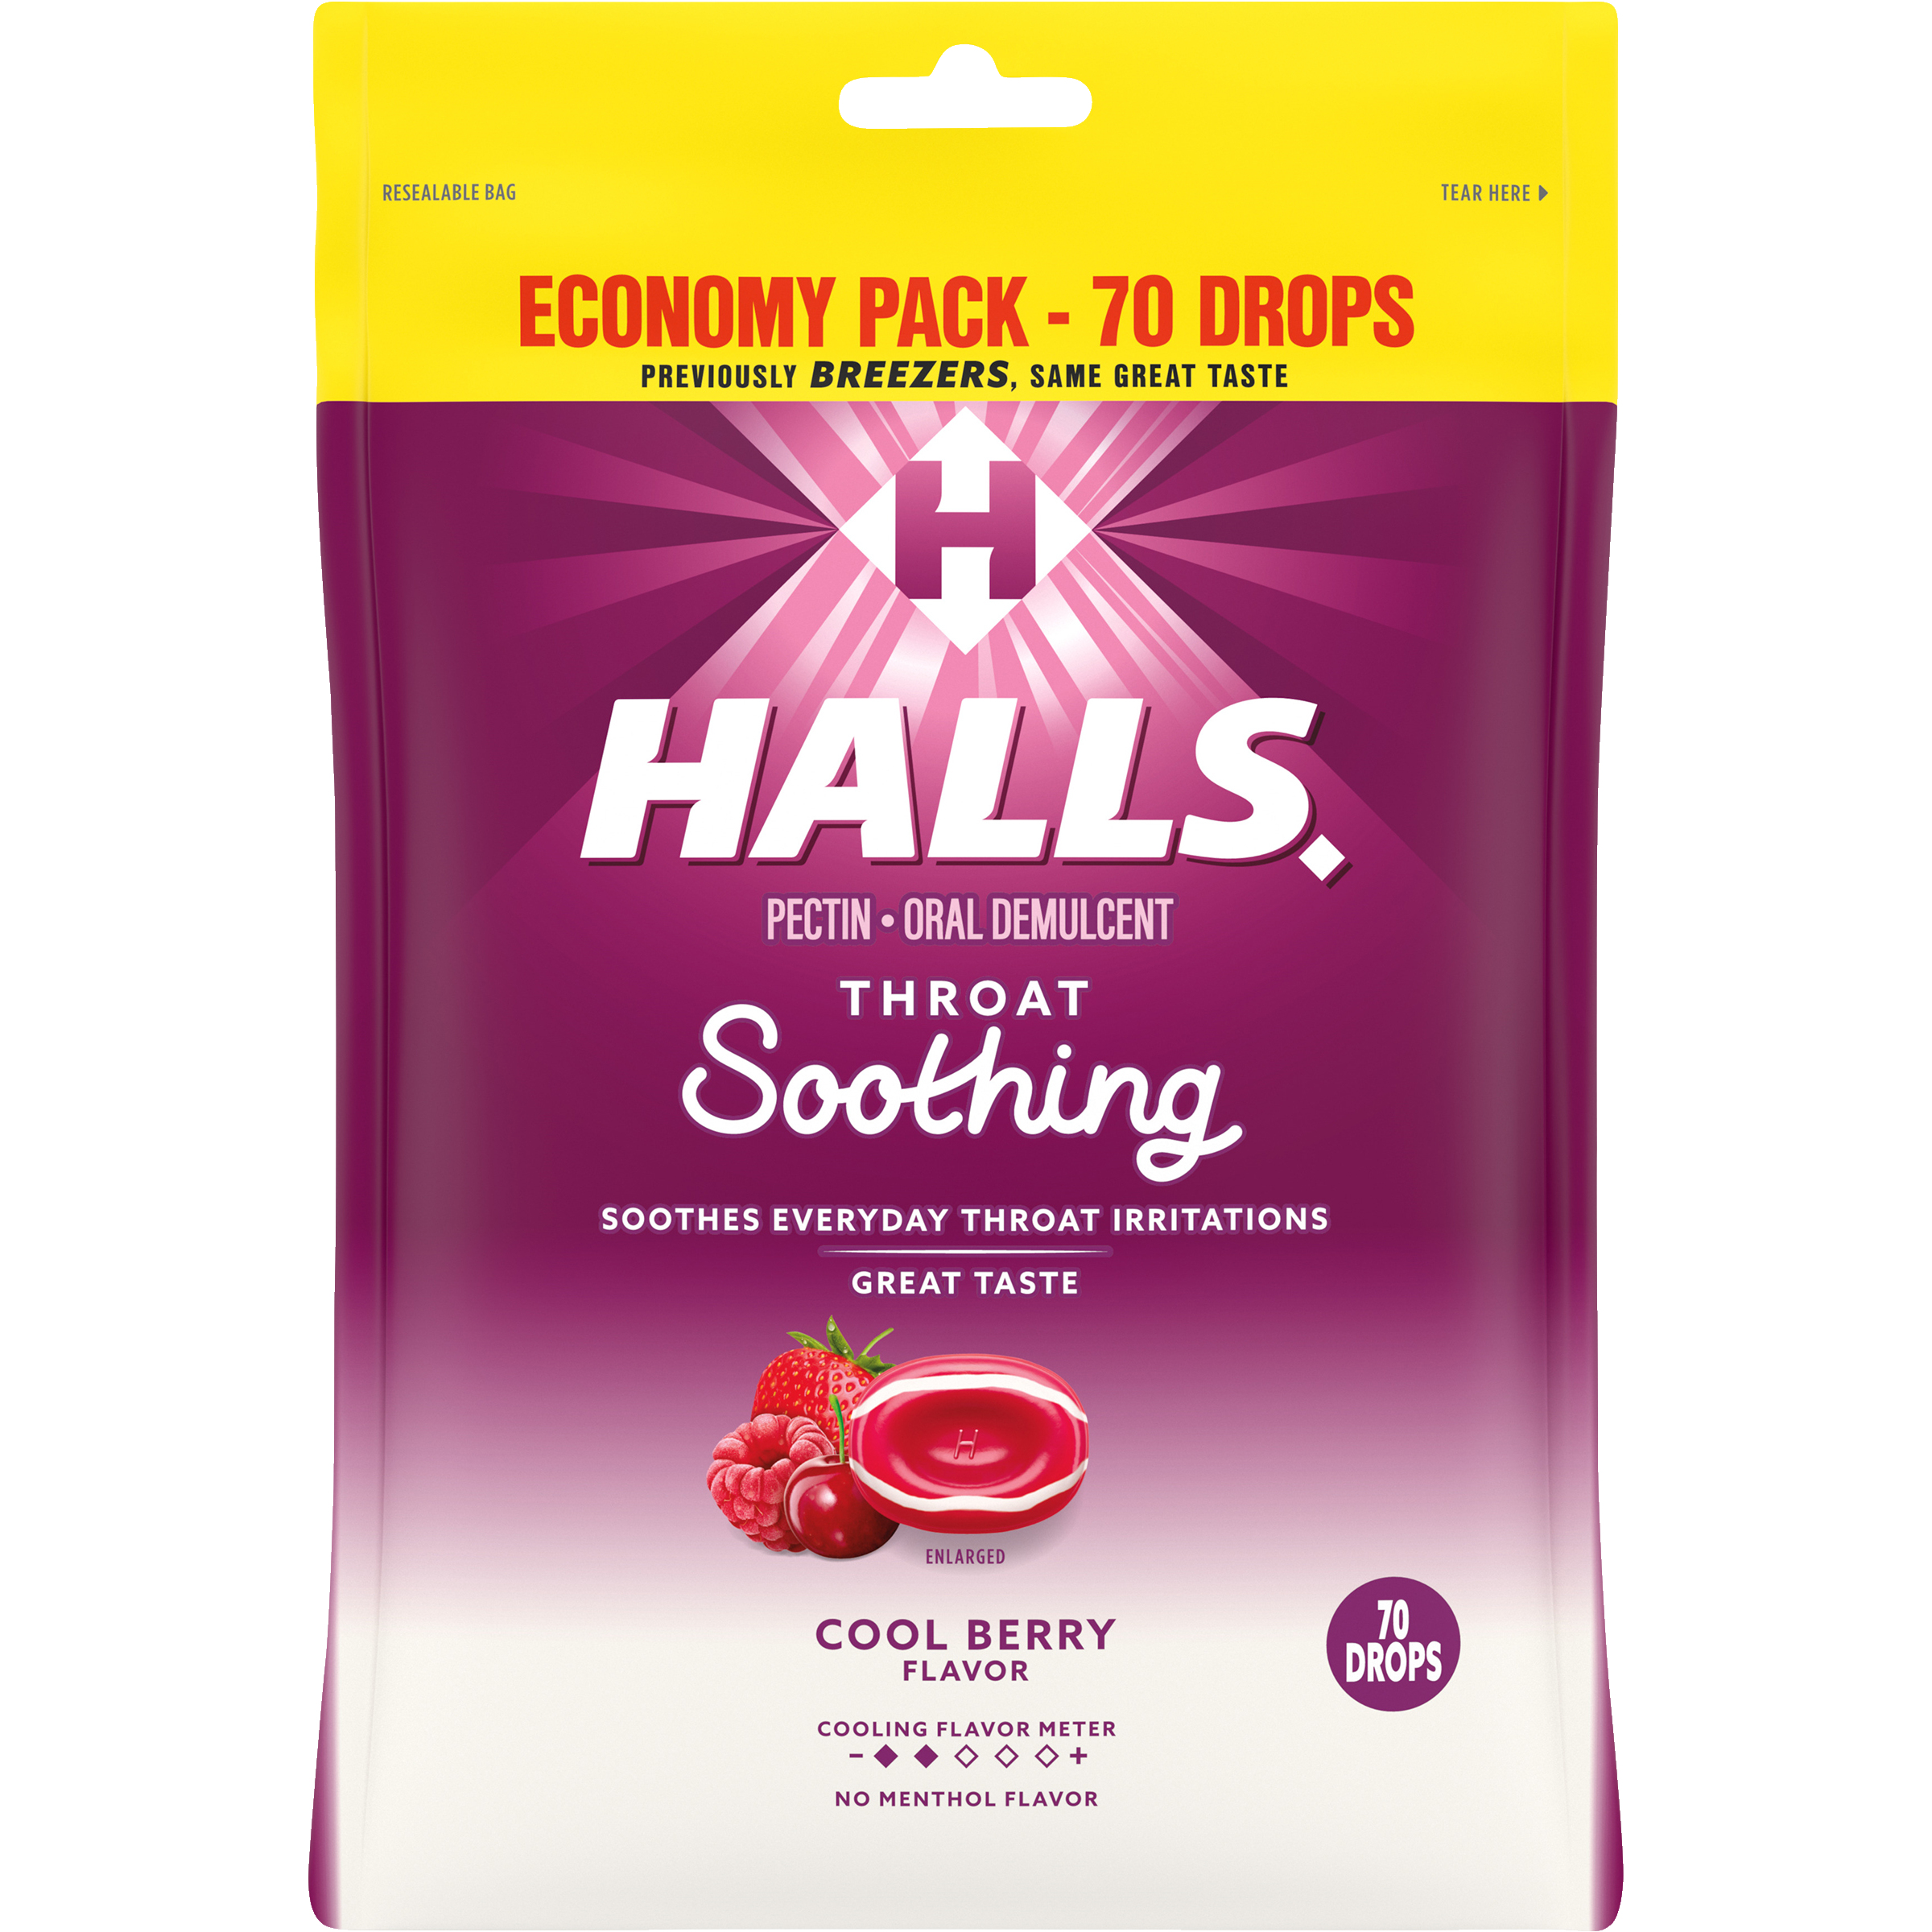 HALLS Throat Soothing (Formerly HALLS Breezers) Cool Berry Throat Drops, Economy Pack, 70 Drops-1